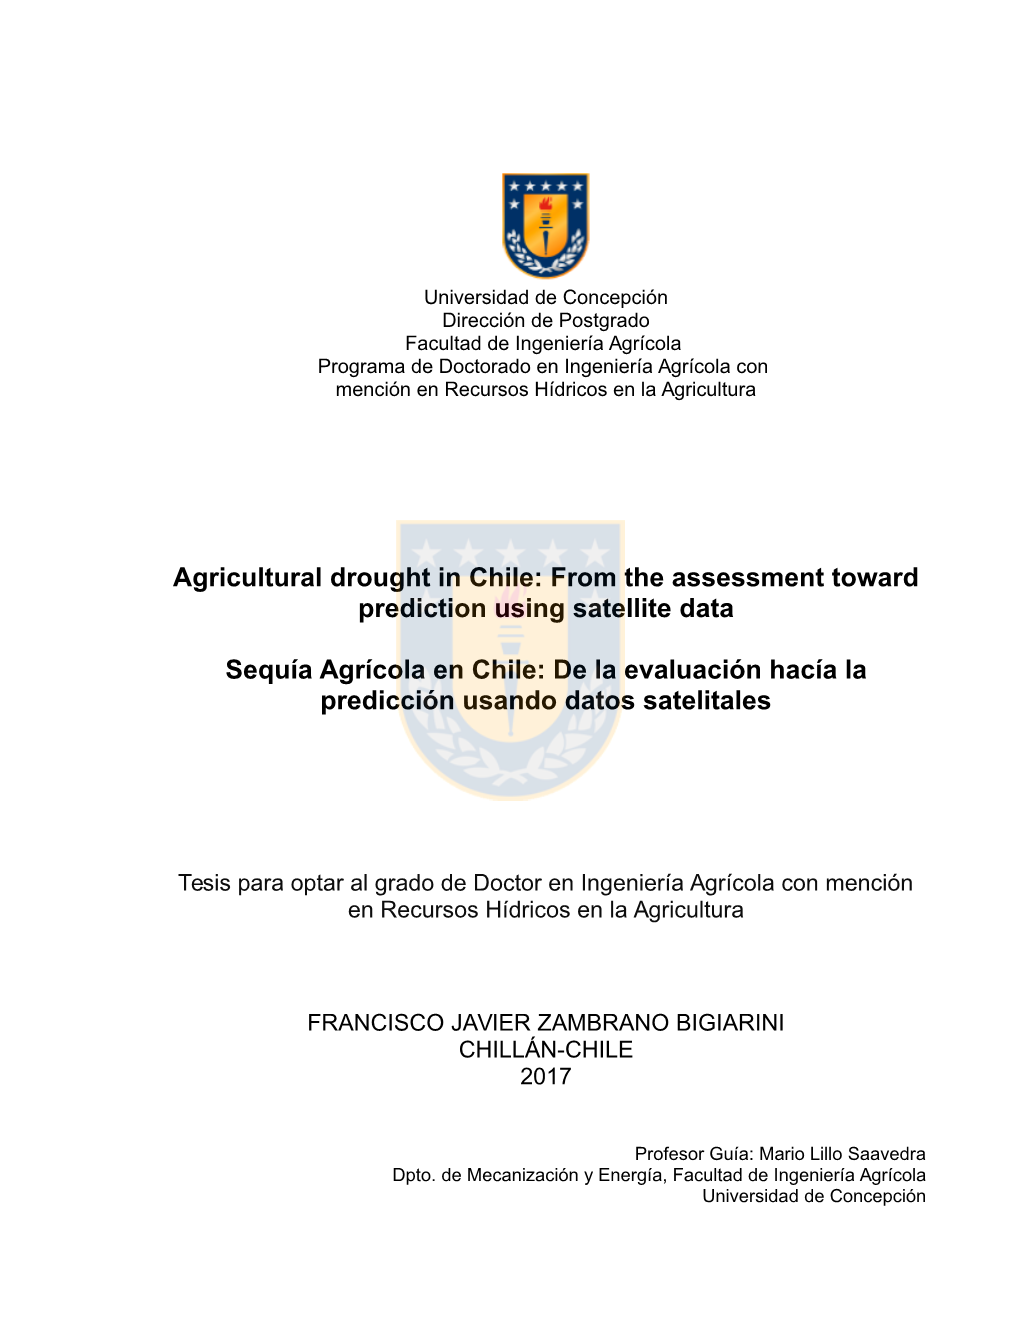 Agricultural Drought in Chile: from the Assessment Toward Prediction Using Satellite Data